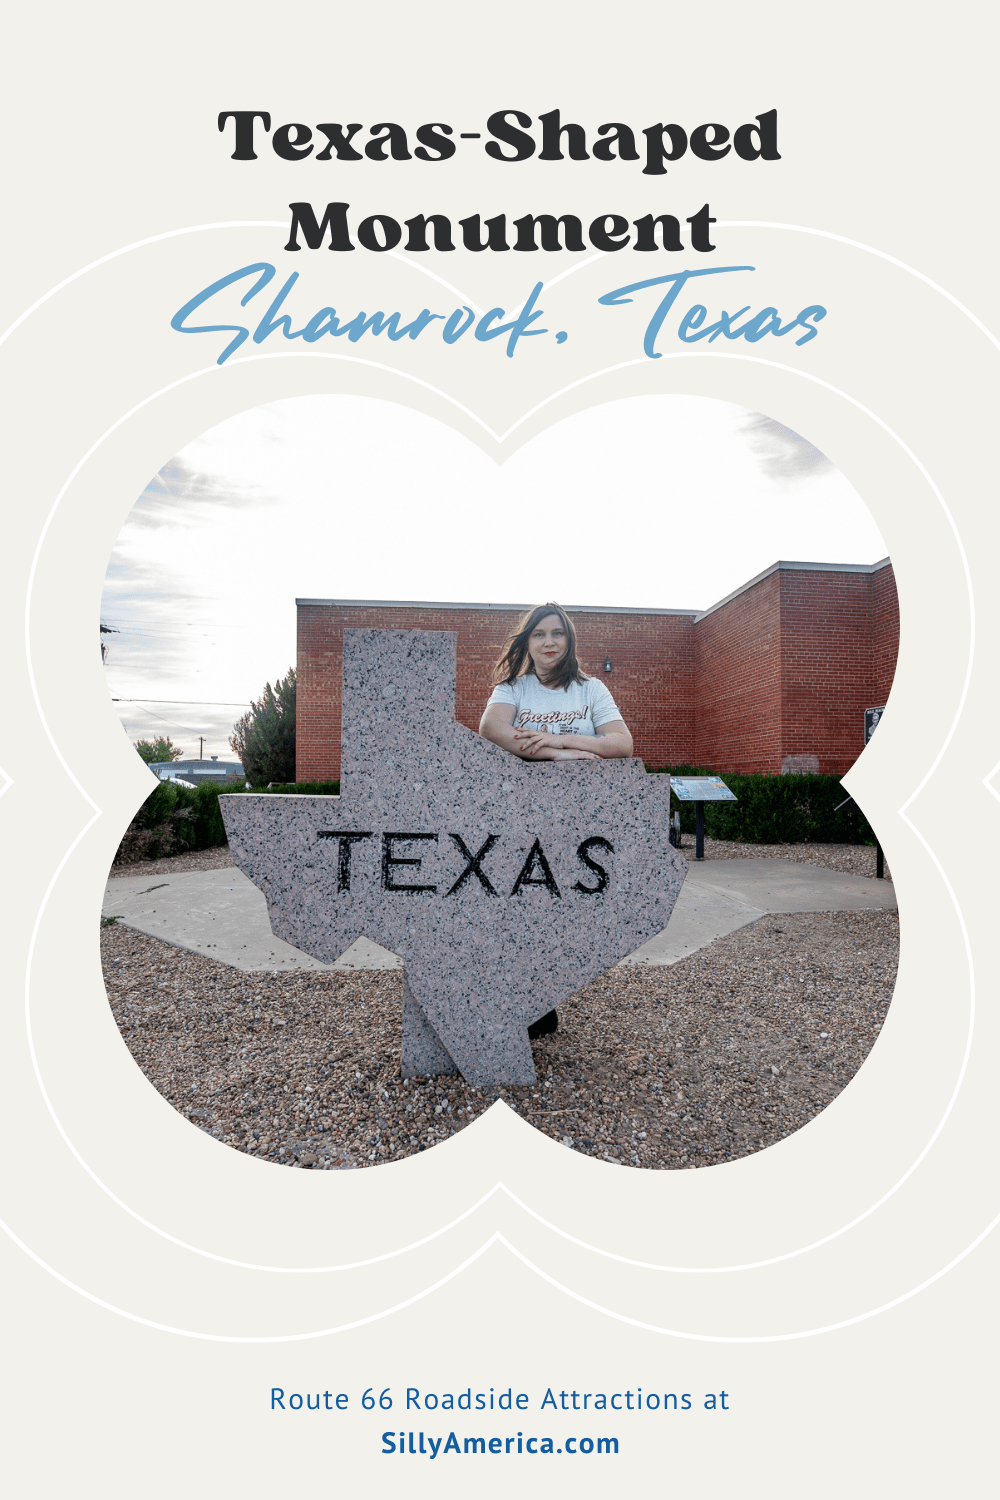 Everything is bigger in Texas, so it is only appropriate to find a big, well, Texas, there. Find this big Texas-shaped monument in Shamrock, Texas on Route 66. This roadside attraction is located at the historic Conoco Tower Station and U-Drop Inn Café in Shamrock, Texas on Route 66.  #RoadTrips #RoadTripStop #Route66 #Route66RoadTrip #TexasRoute66 #Texas #TexasRoadTrip #TexasRoadsideAttractions #RoadsideAttractions #RoadsideAttraction #RoadsideAmerica #RoadTrip 